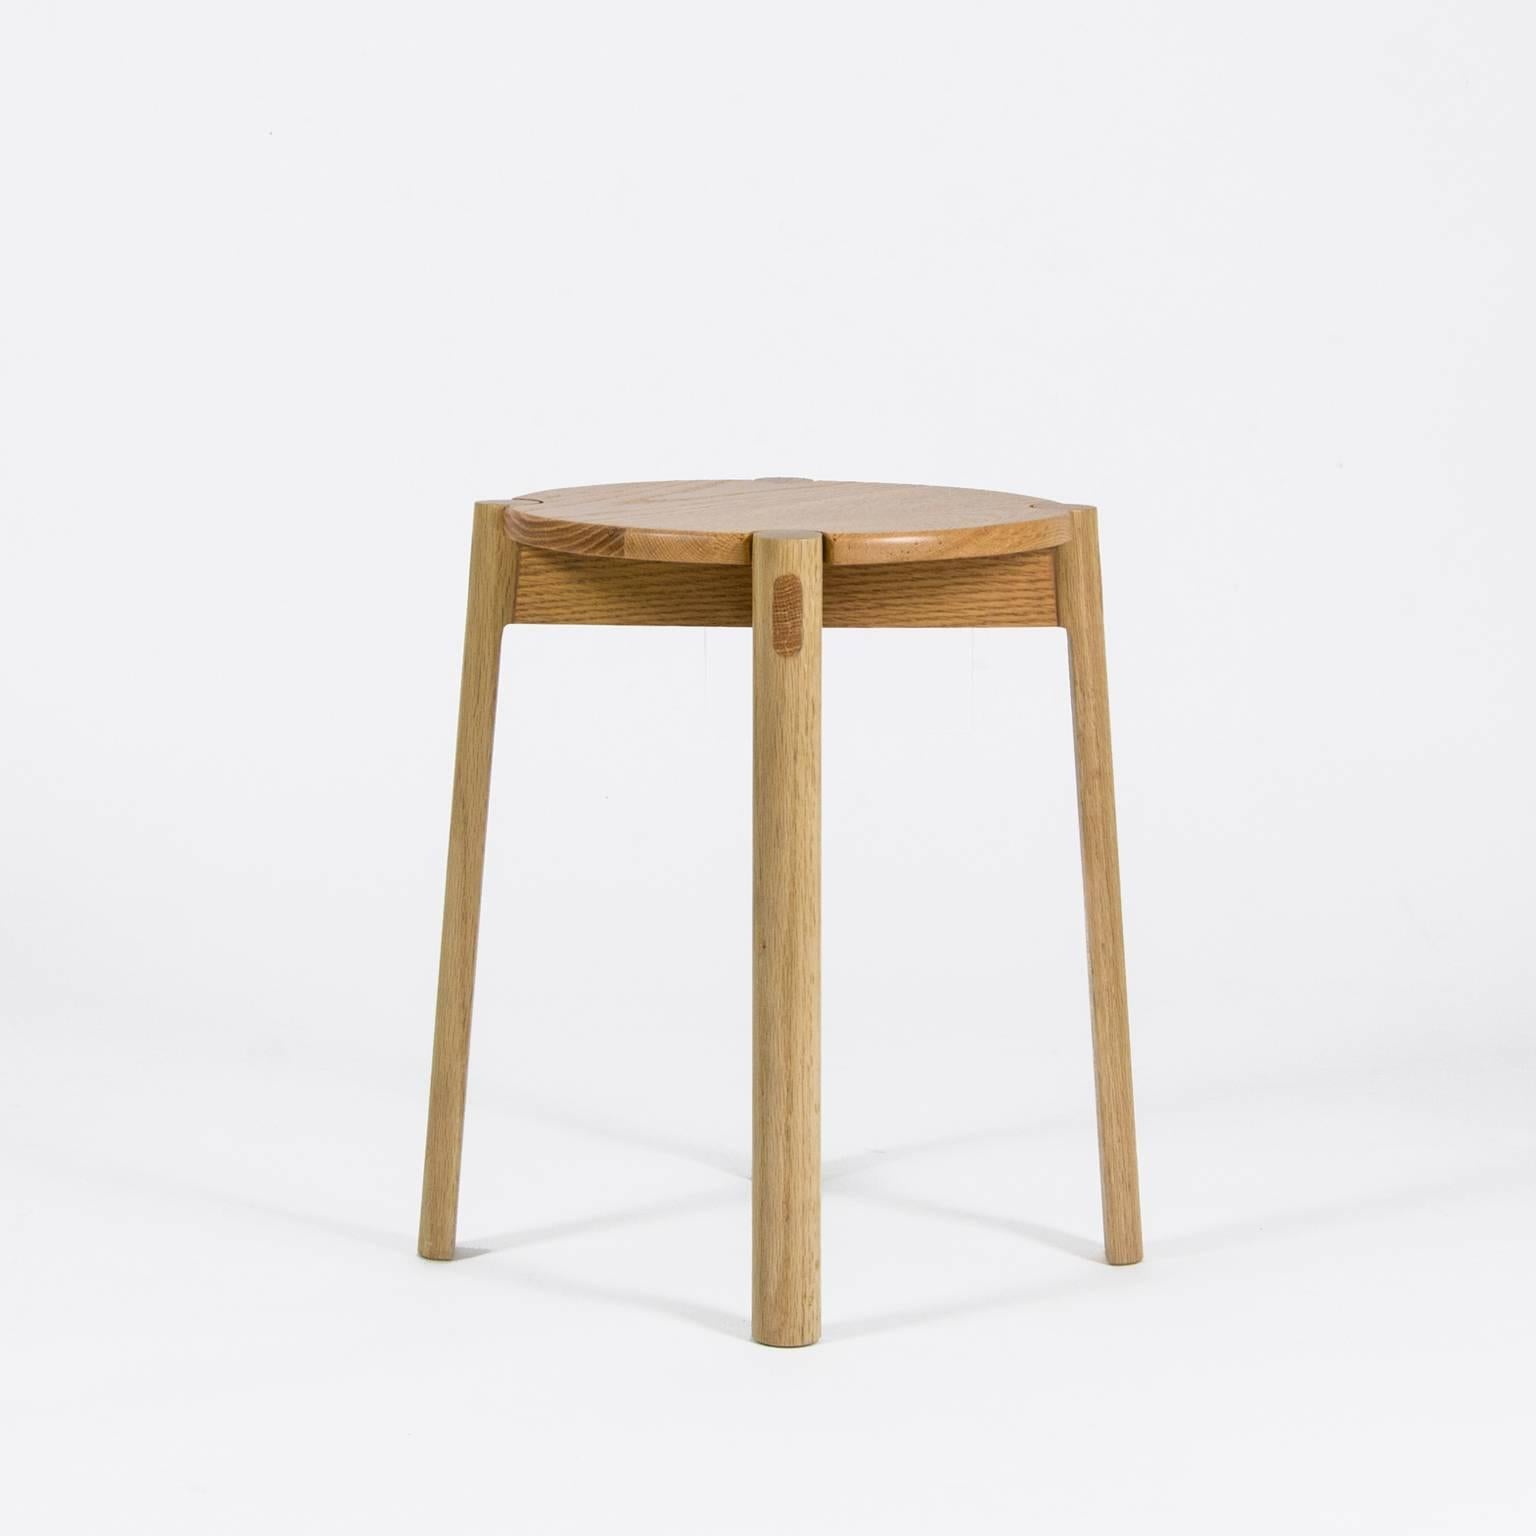 This stool was Influenced by Denmark’s love of materials and well-crafted design. Jonah Willcox-Healey developed the Nora Stool, a timeless wooden stool with a simple and clean look.